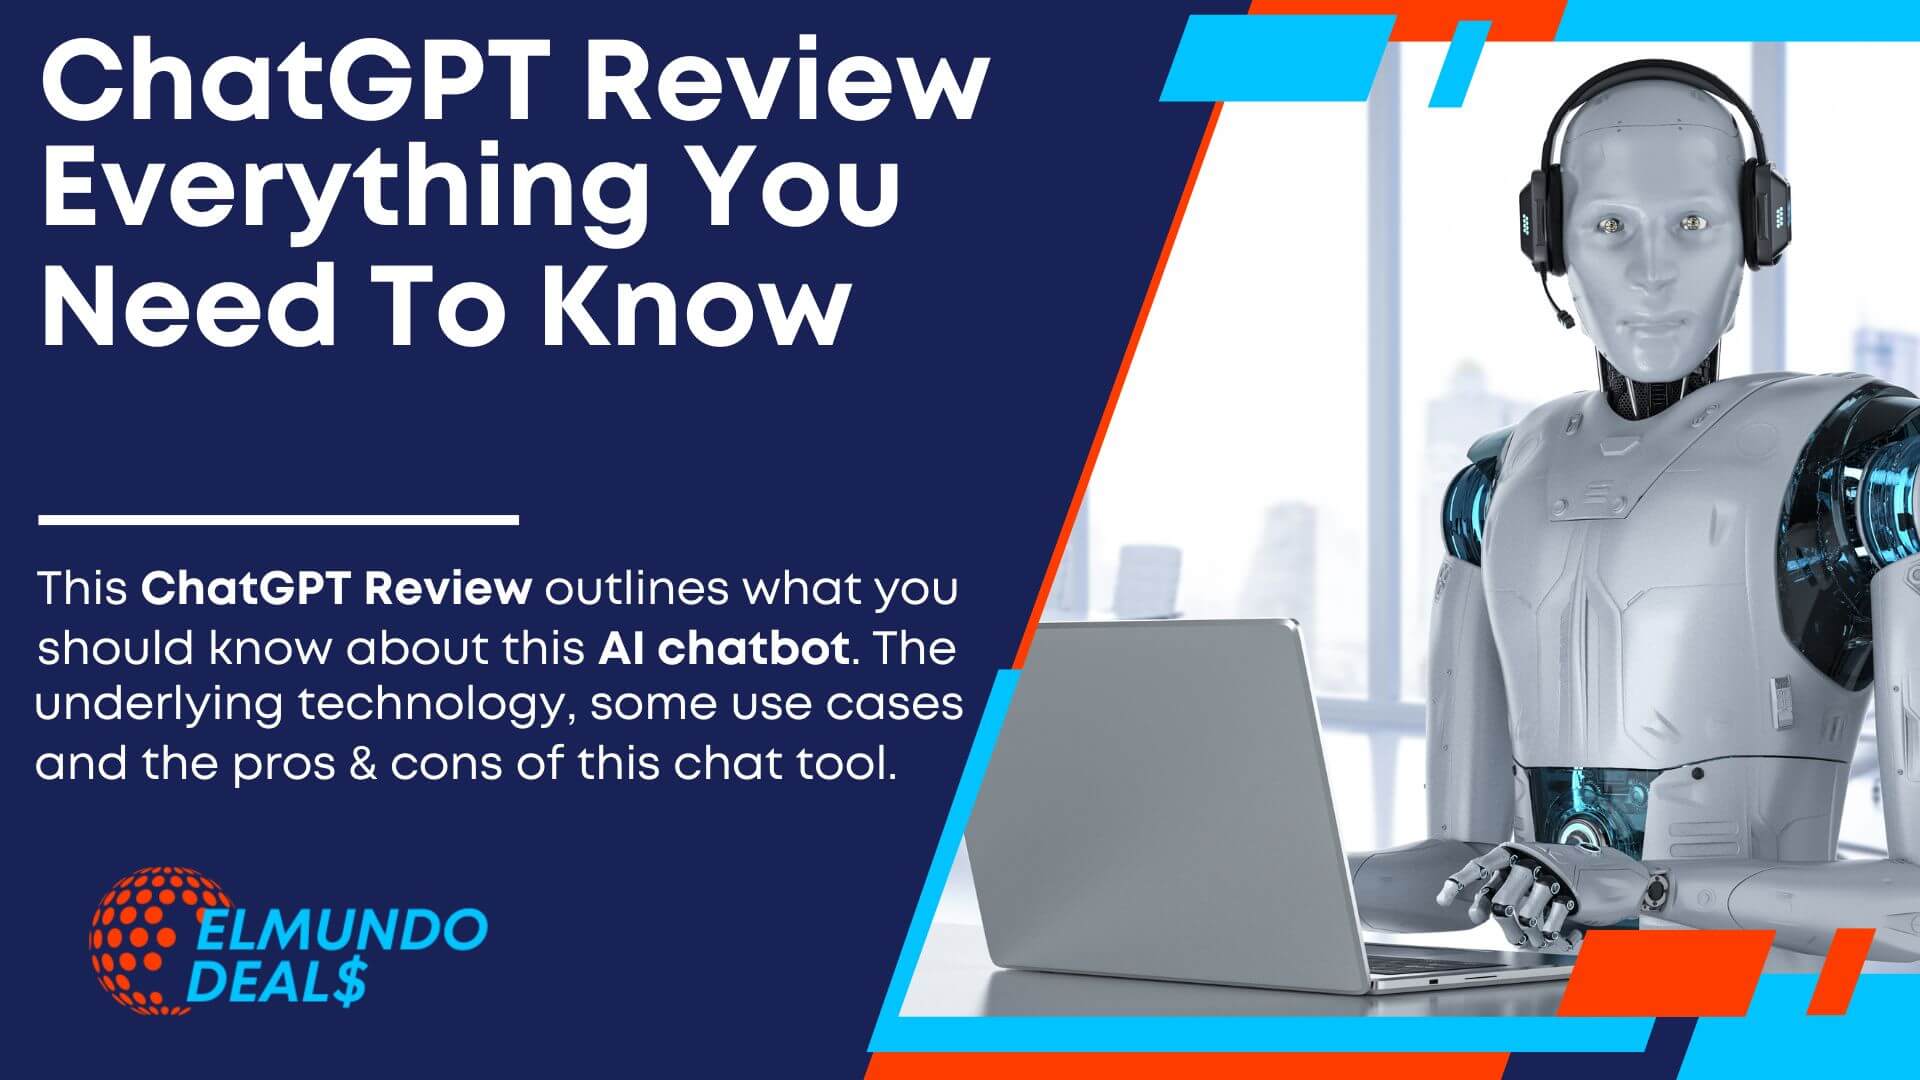 ChatGPT Review: Everything You Need To Know Abotu Chat GPT (OpenAI)